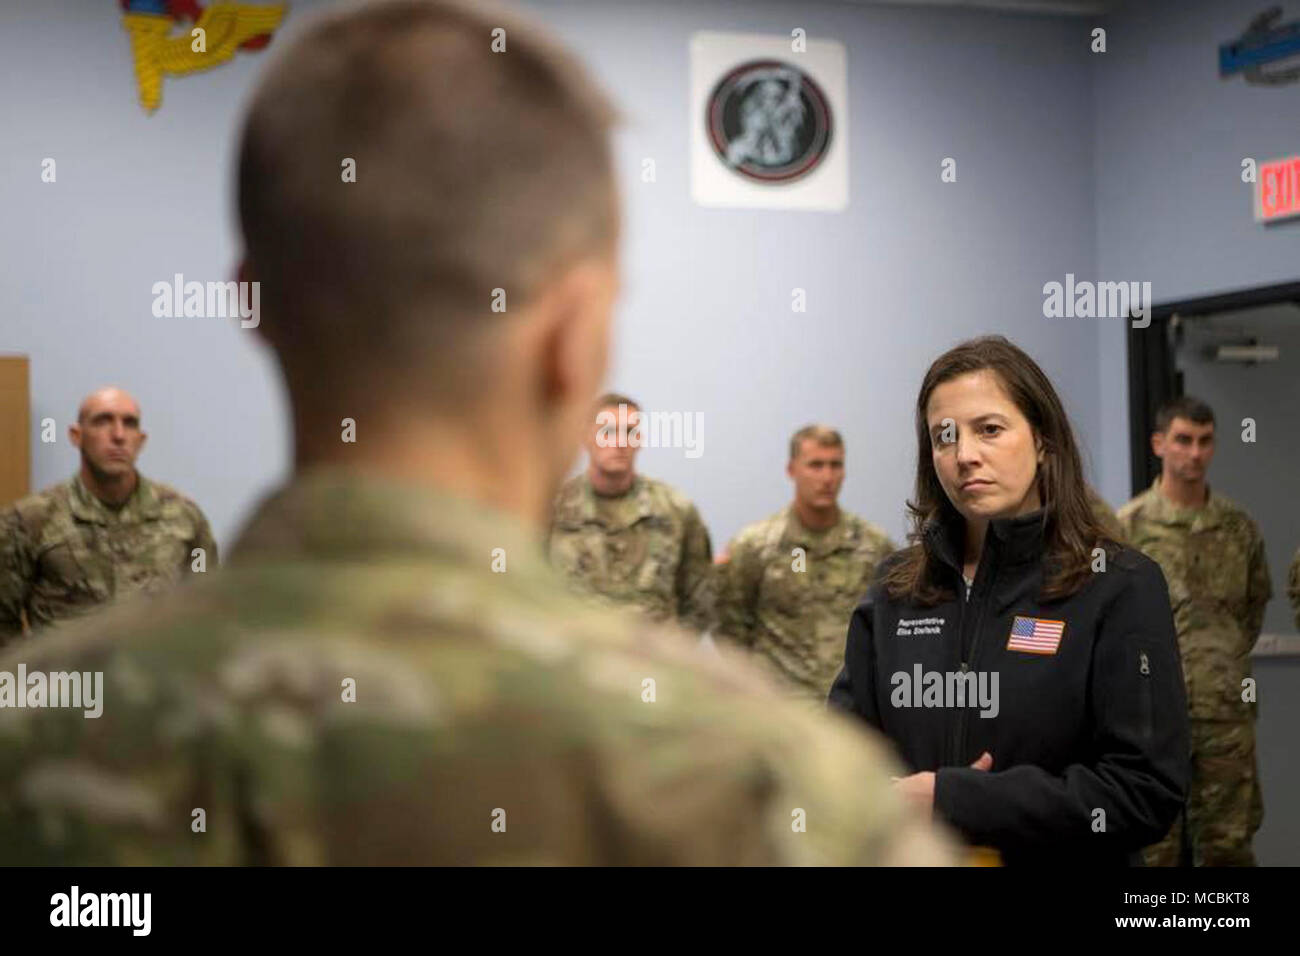 Congresswoman Rep. Elise Stefanik is briefed by one of the leading Soldiers from 1st Brigade Combat Team, 10th Mountain Division at Fort Drum regarding the Regionally Aligned Forces mission as the East Africa Response Force in Djibouti, Africa. Stock Photo